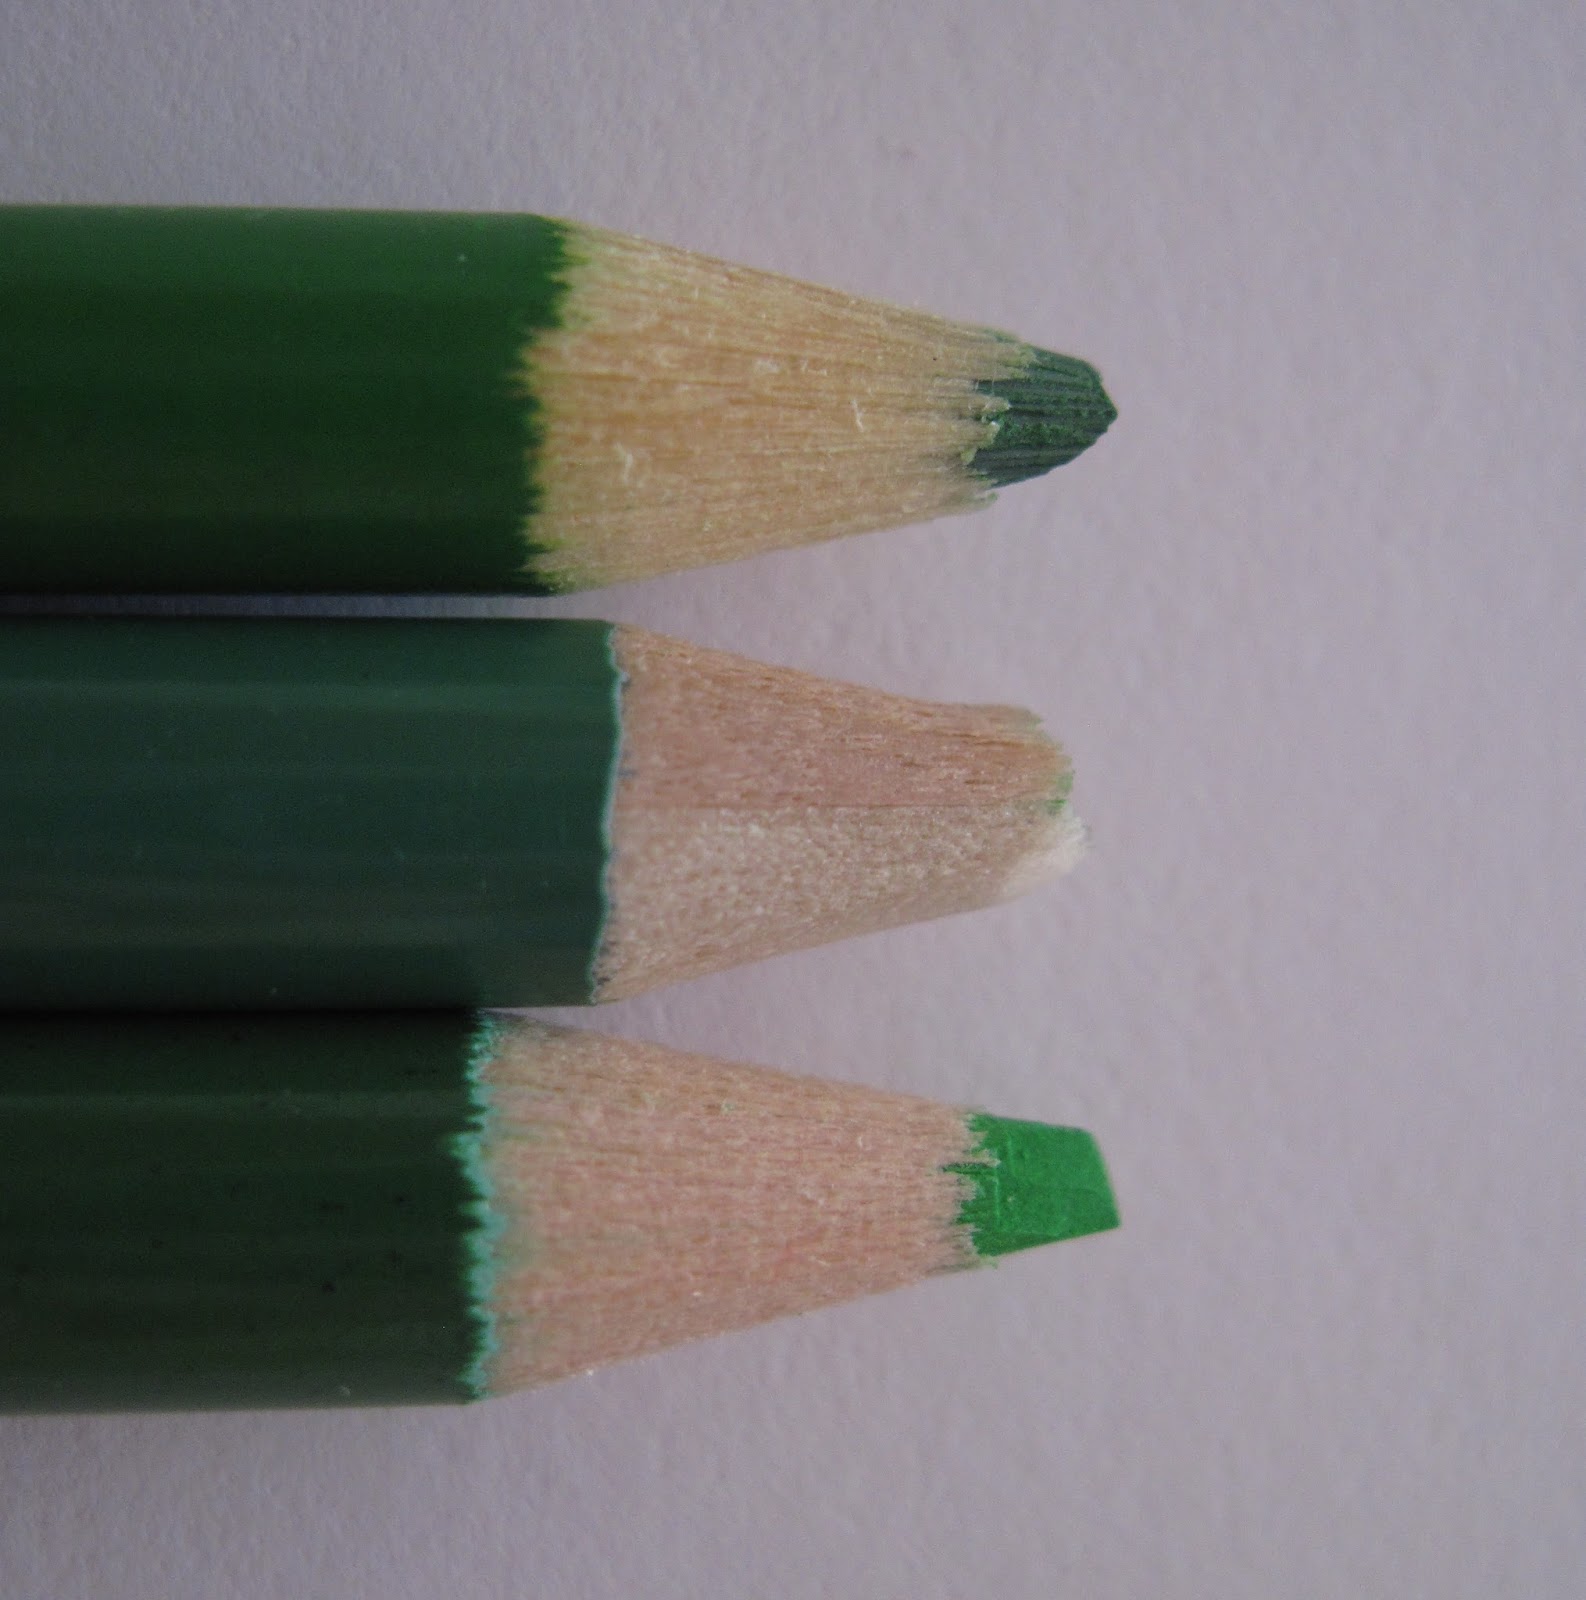 $1000 LUXURY COLOR PENCILS VS $1 CRAYOLA: Which Is Better? 